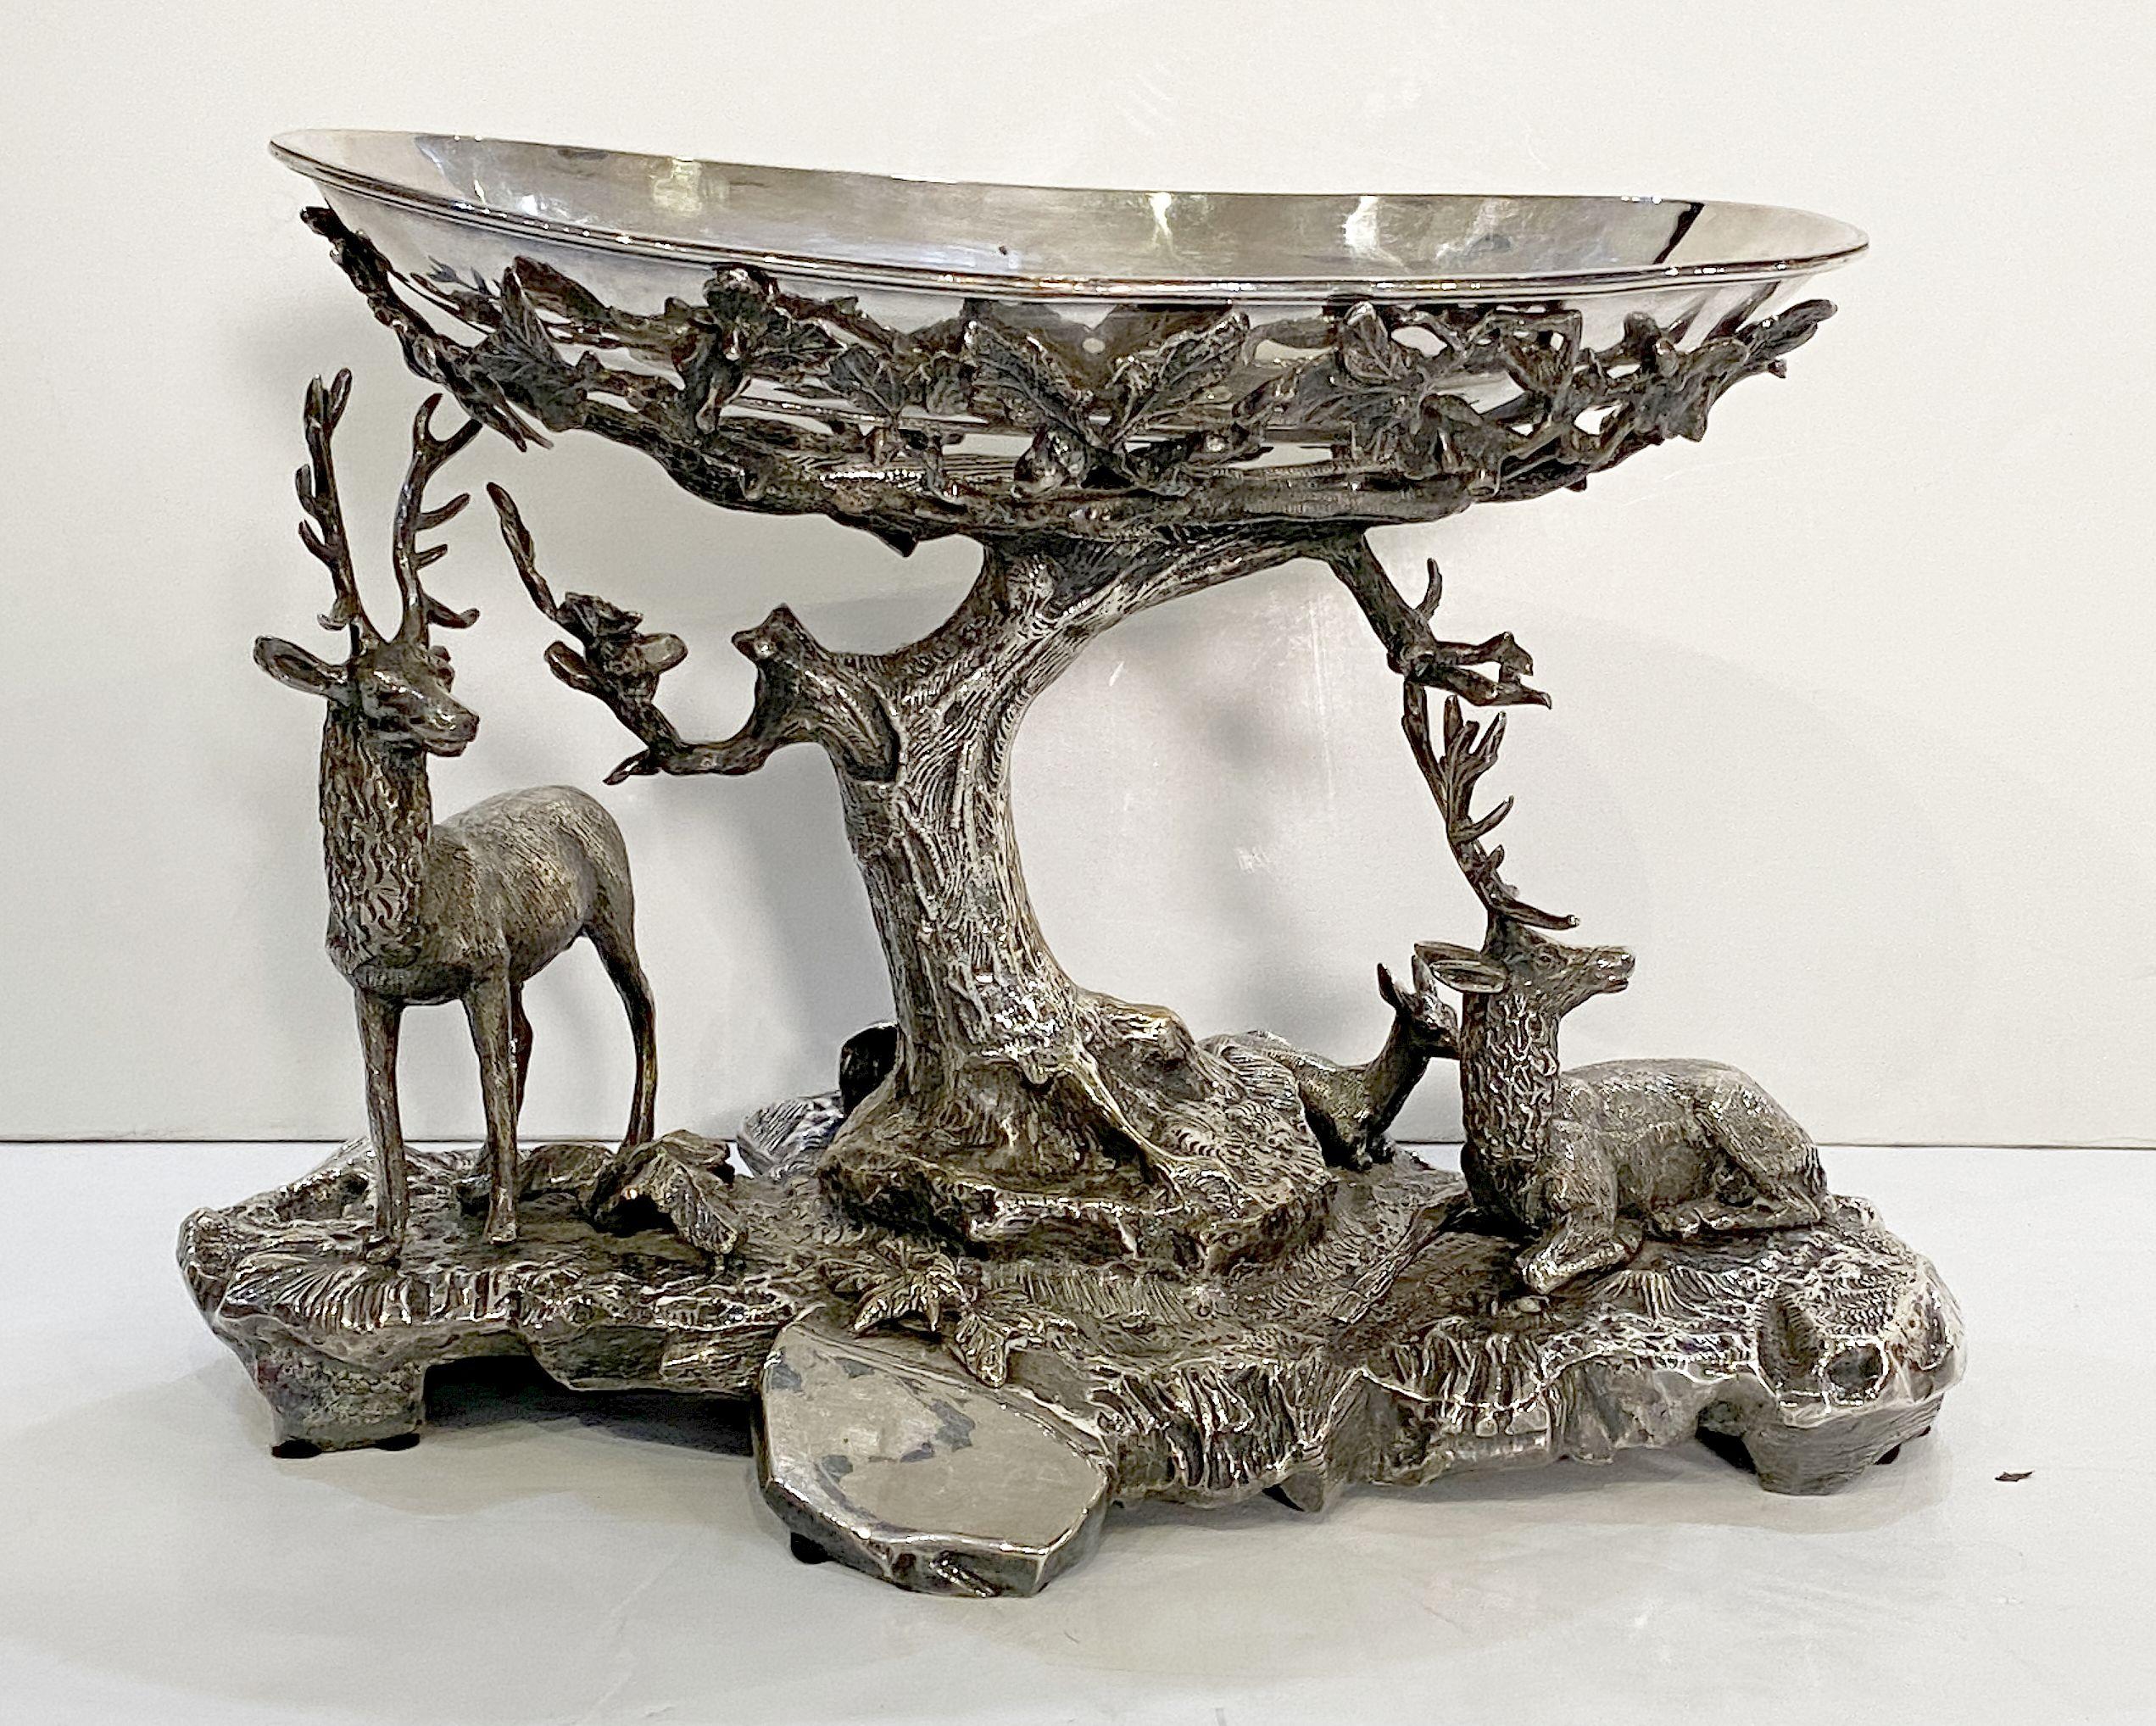 Large Valenti Stag or Deer Sculptural Centerpiece of Silver Plated Bronze  5